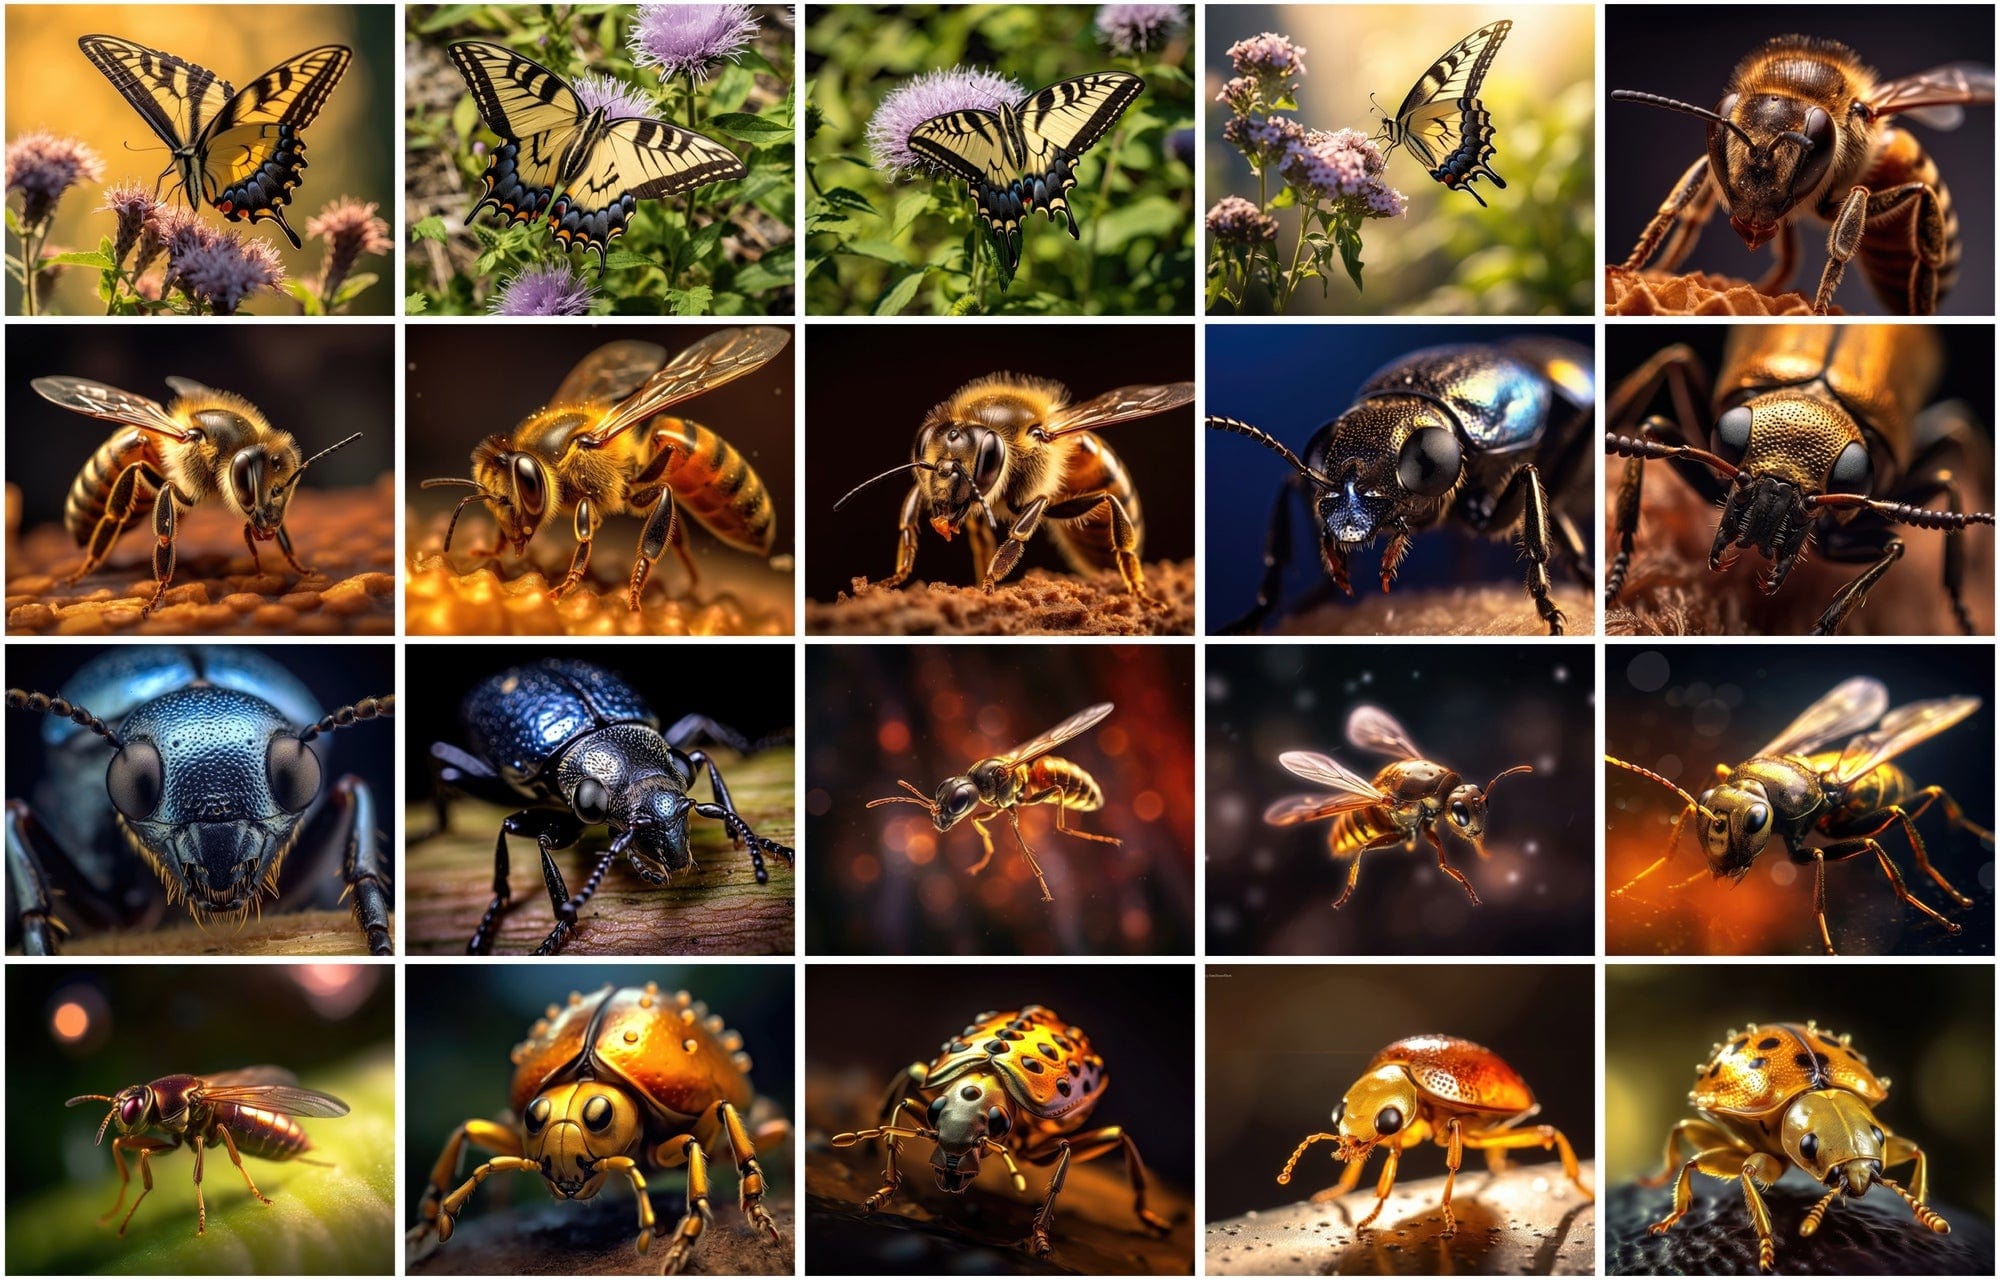 188 High-Resolution Macro Insect Images Bundle, Commercial License Included Digital Download Sumobundle